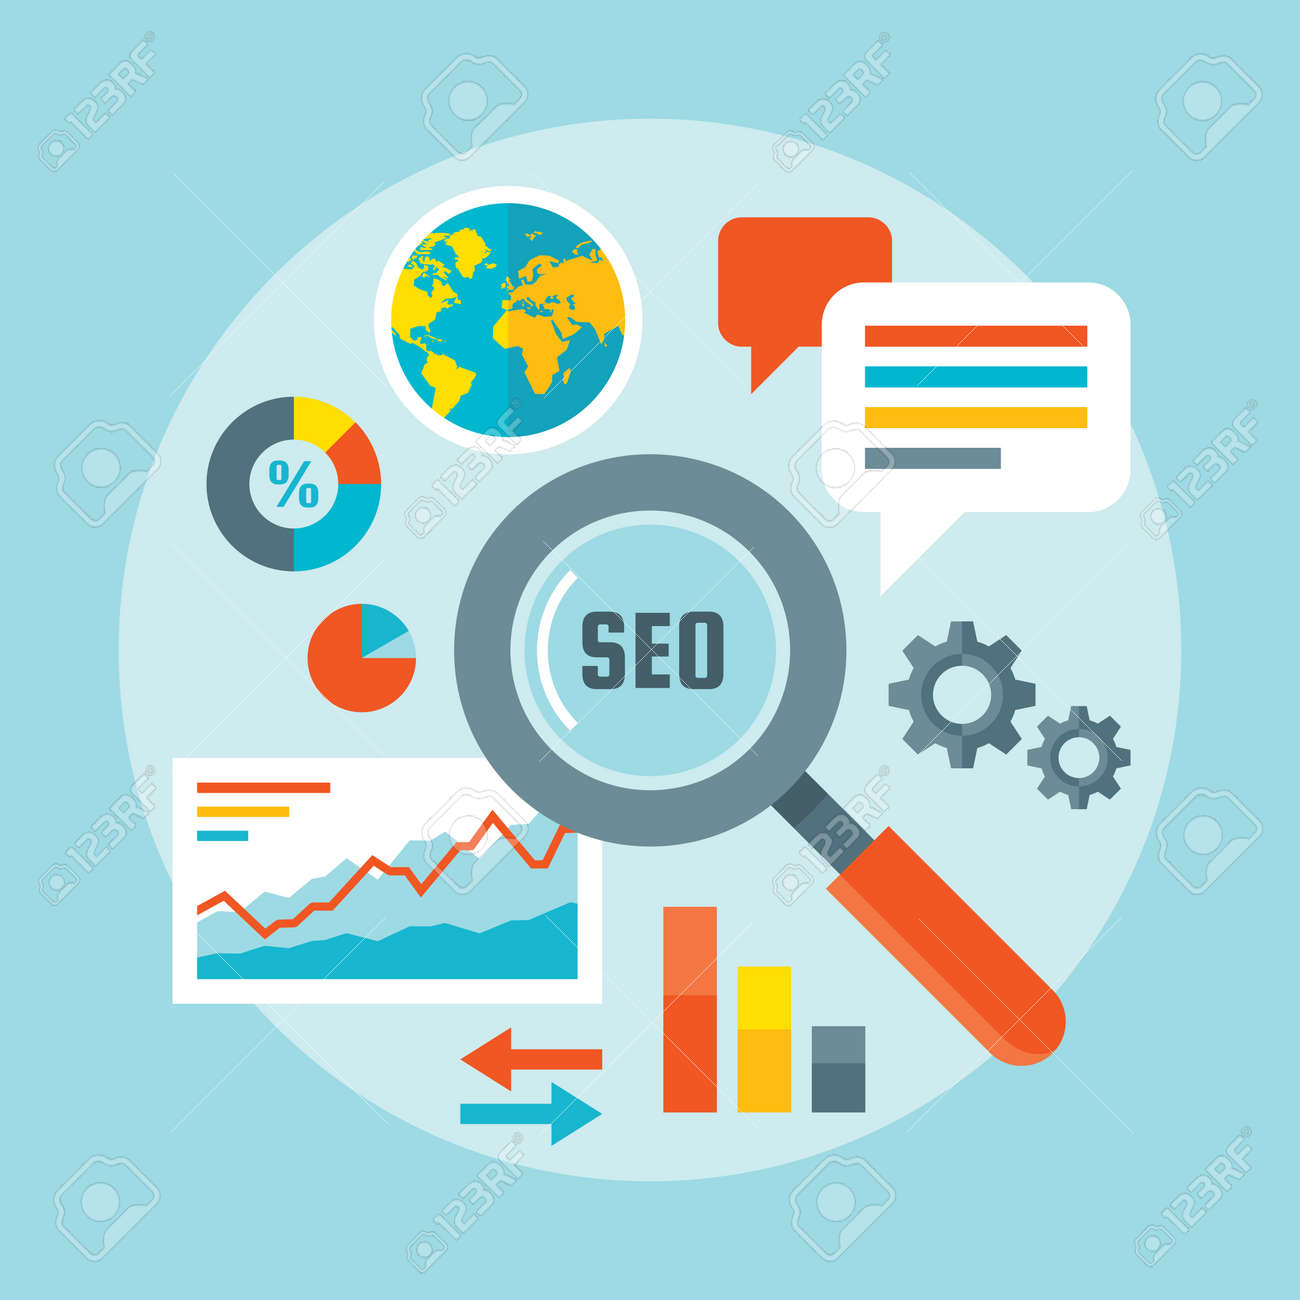 How To Optimize Your Website for Maximum SEO Results